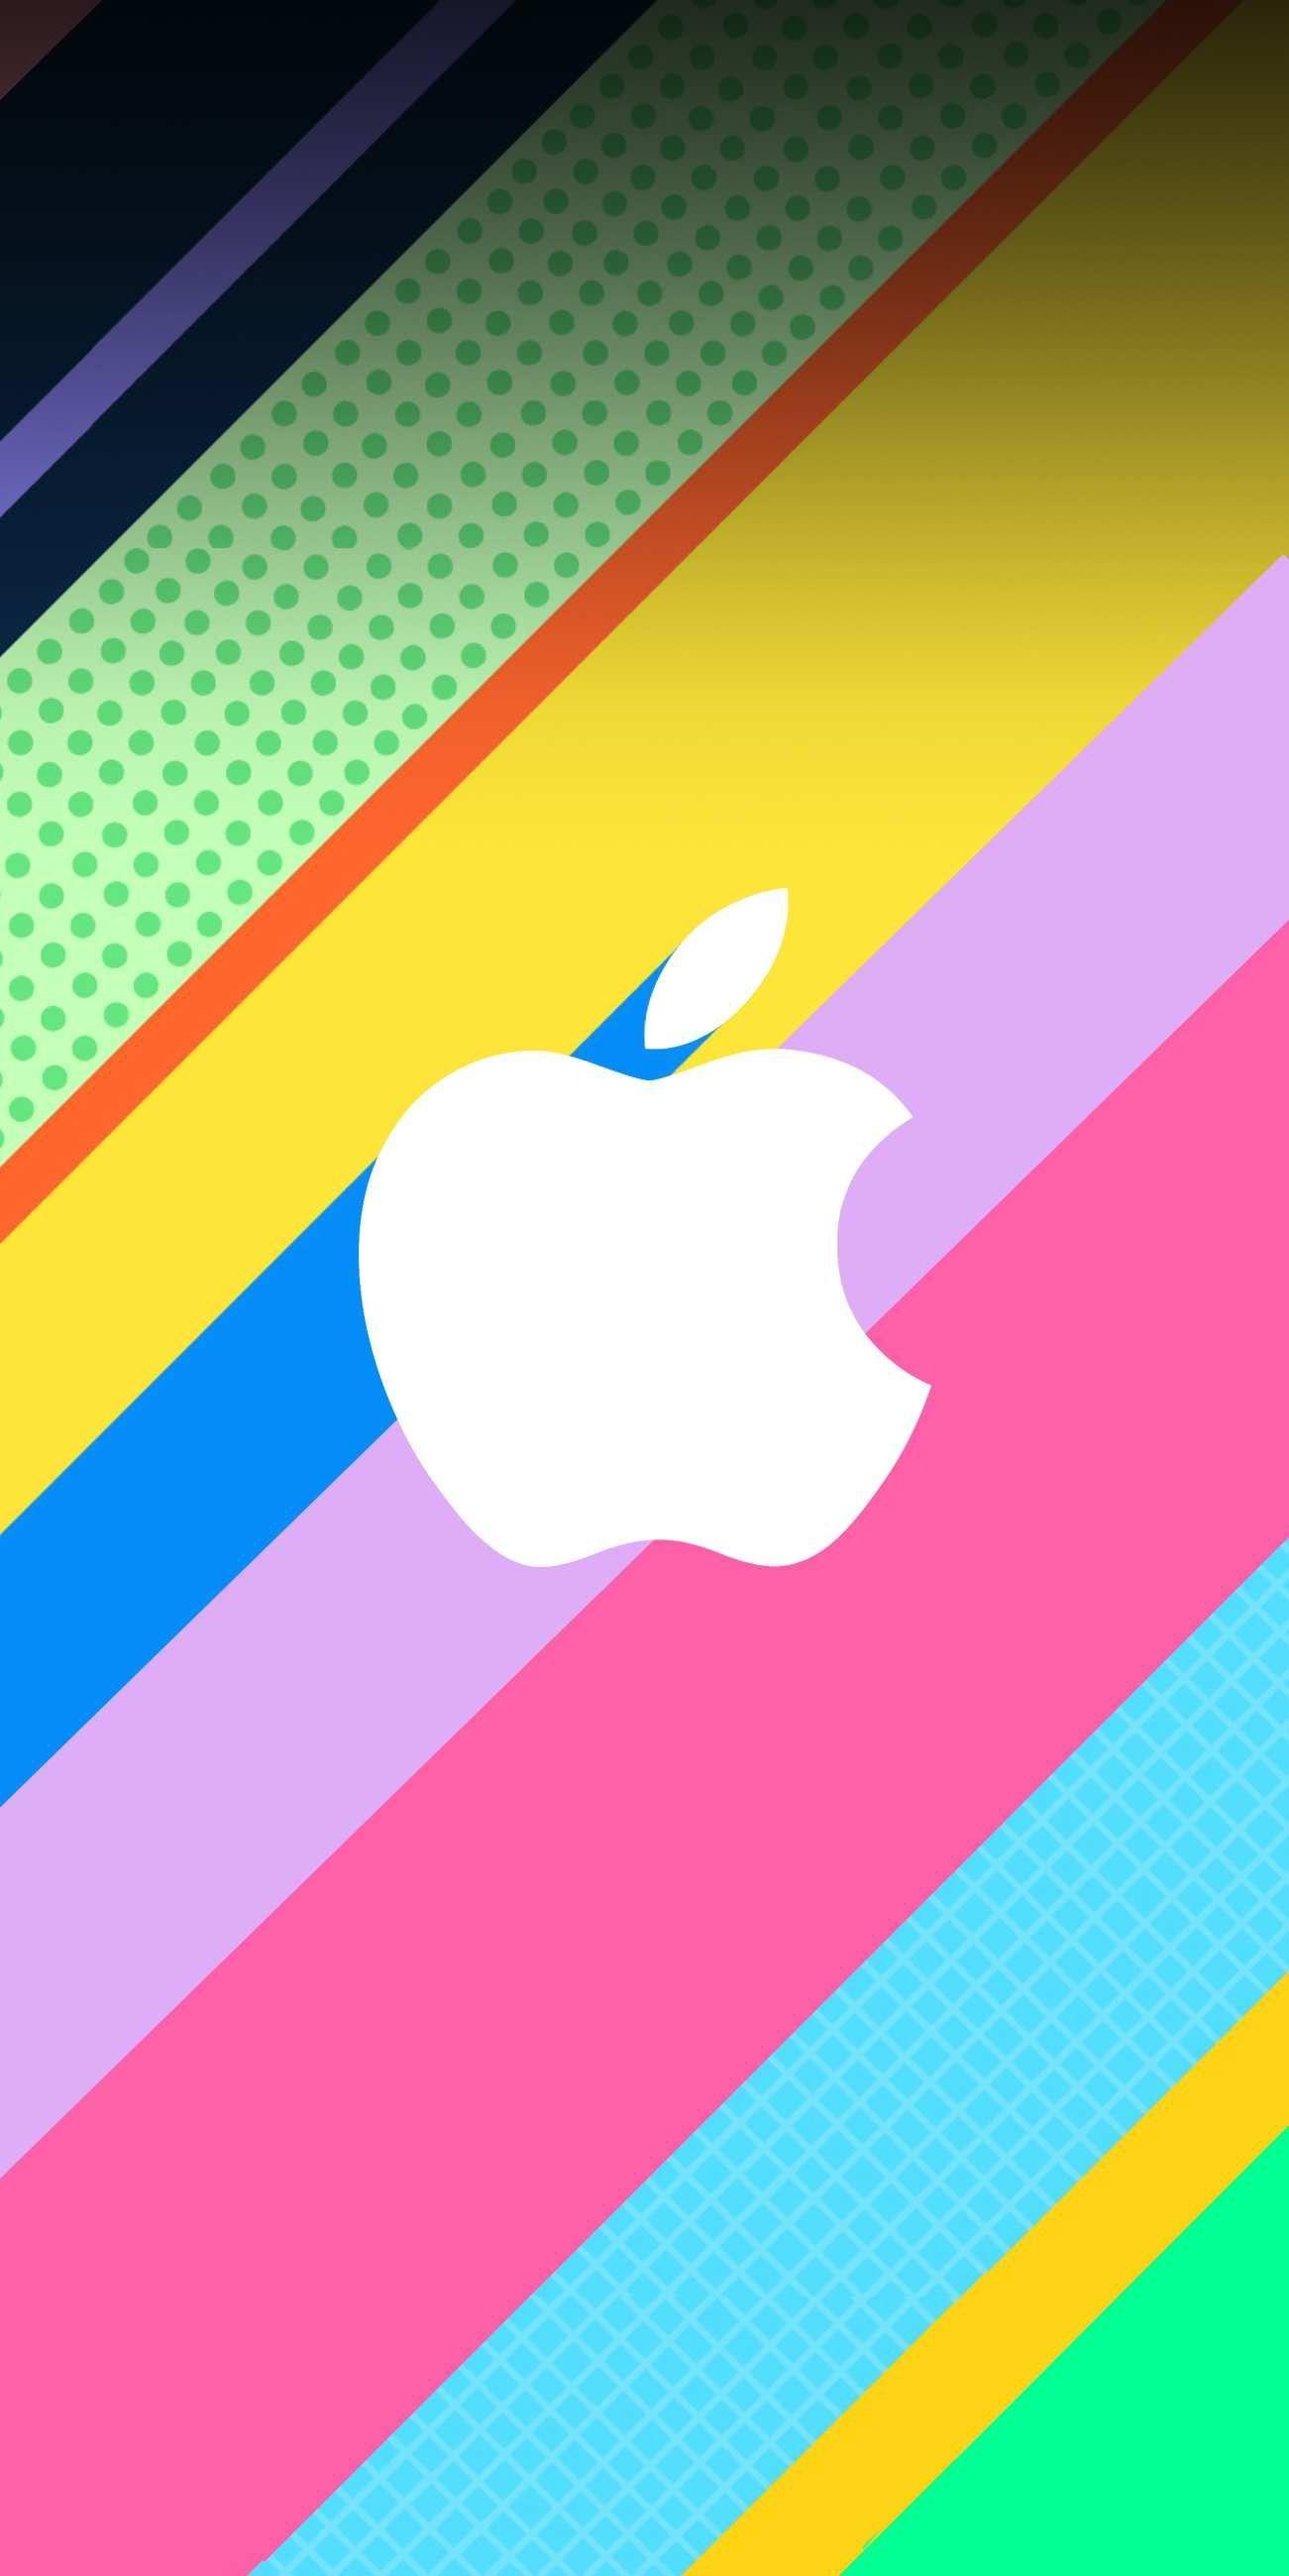 Colorful Apple Logo Wallpapers - Top Free Colorful Apple Logo ...